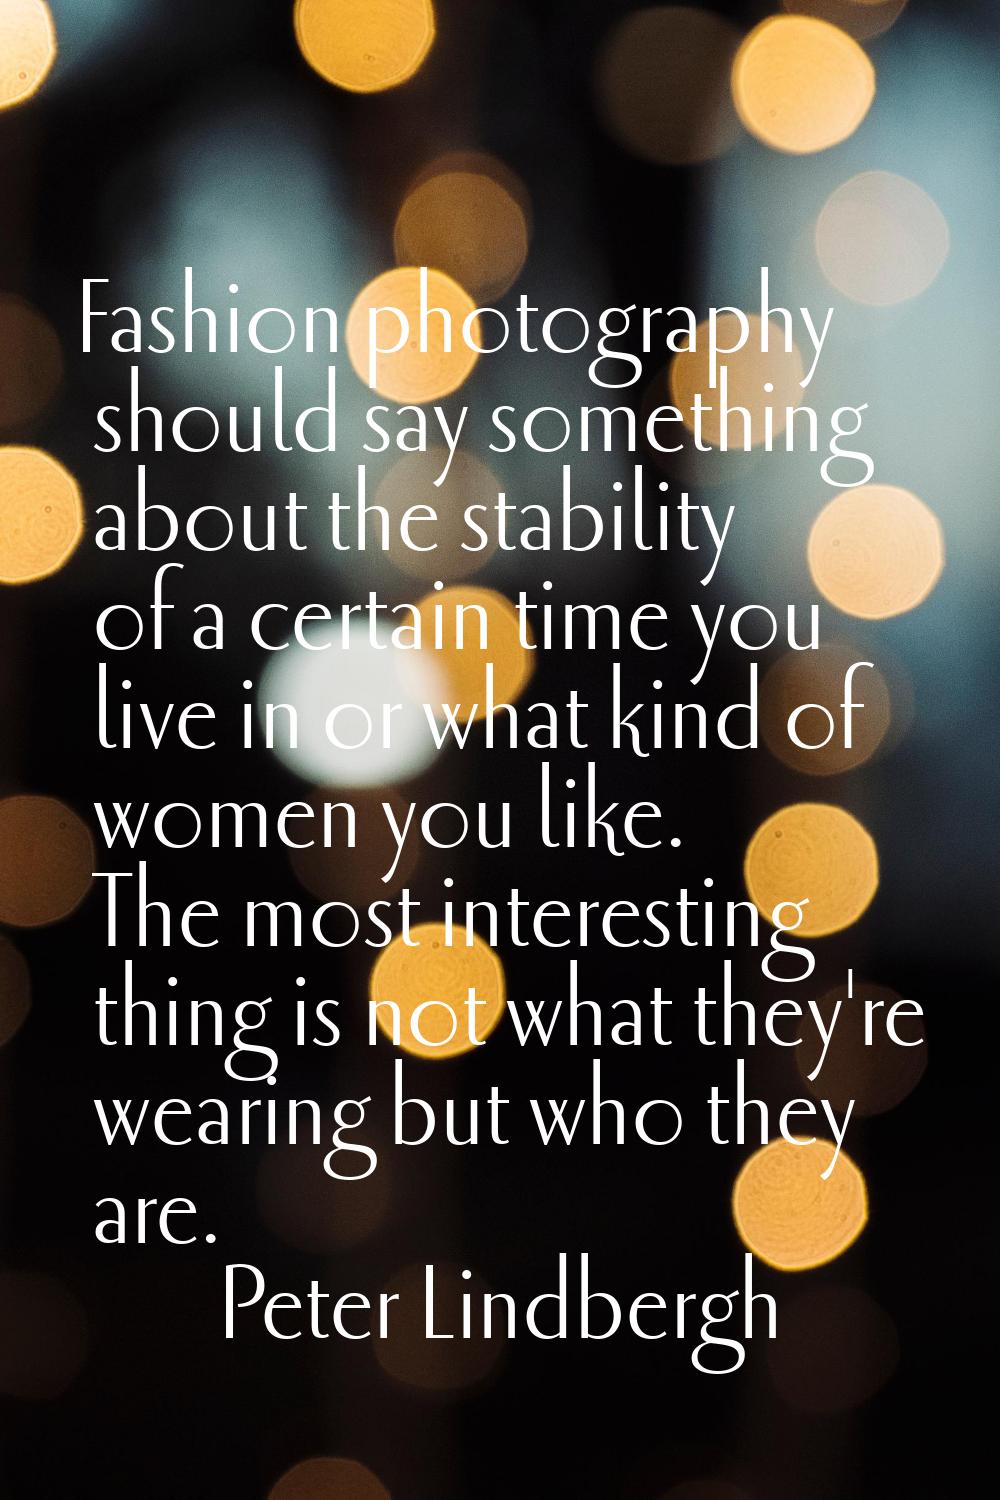 Fashion photography should say something about the stability of a certain time you live in or what 